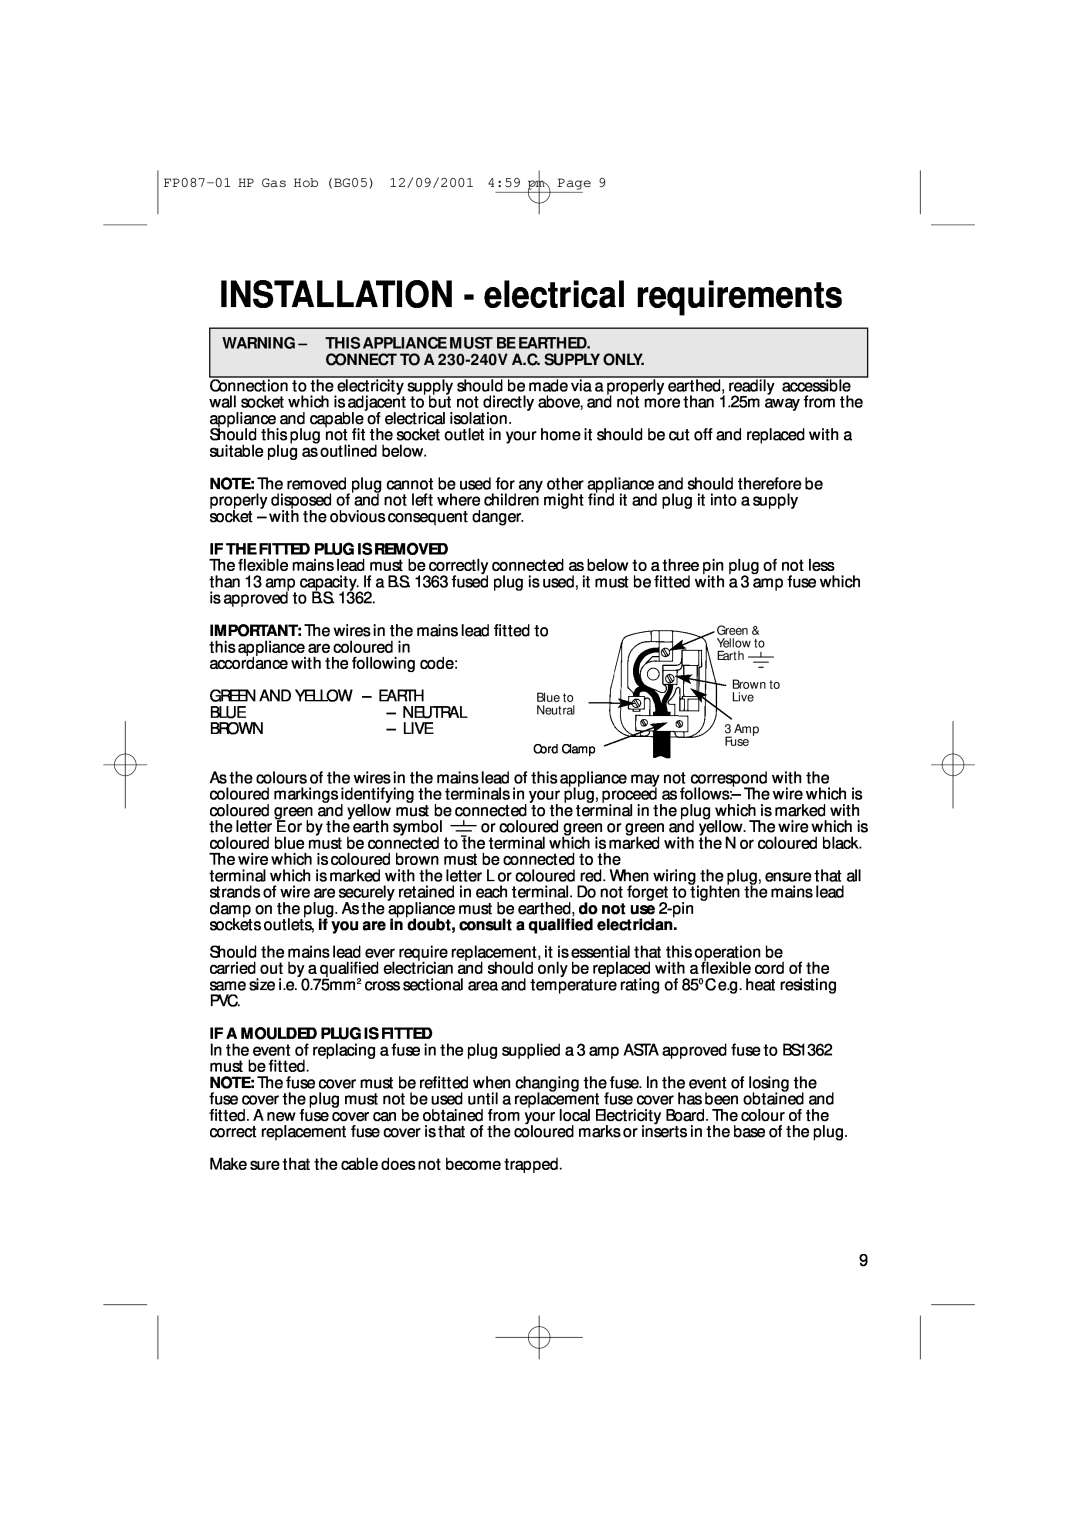 Hotpoint BG05 manual INSTALLATION - electrical requirements, Warning - This Appliance Must Be Earthed 